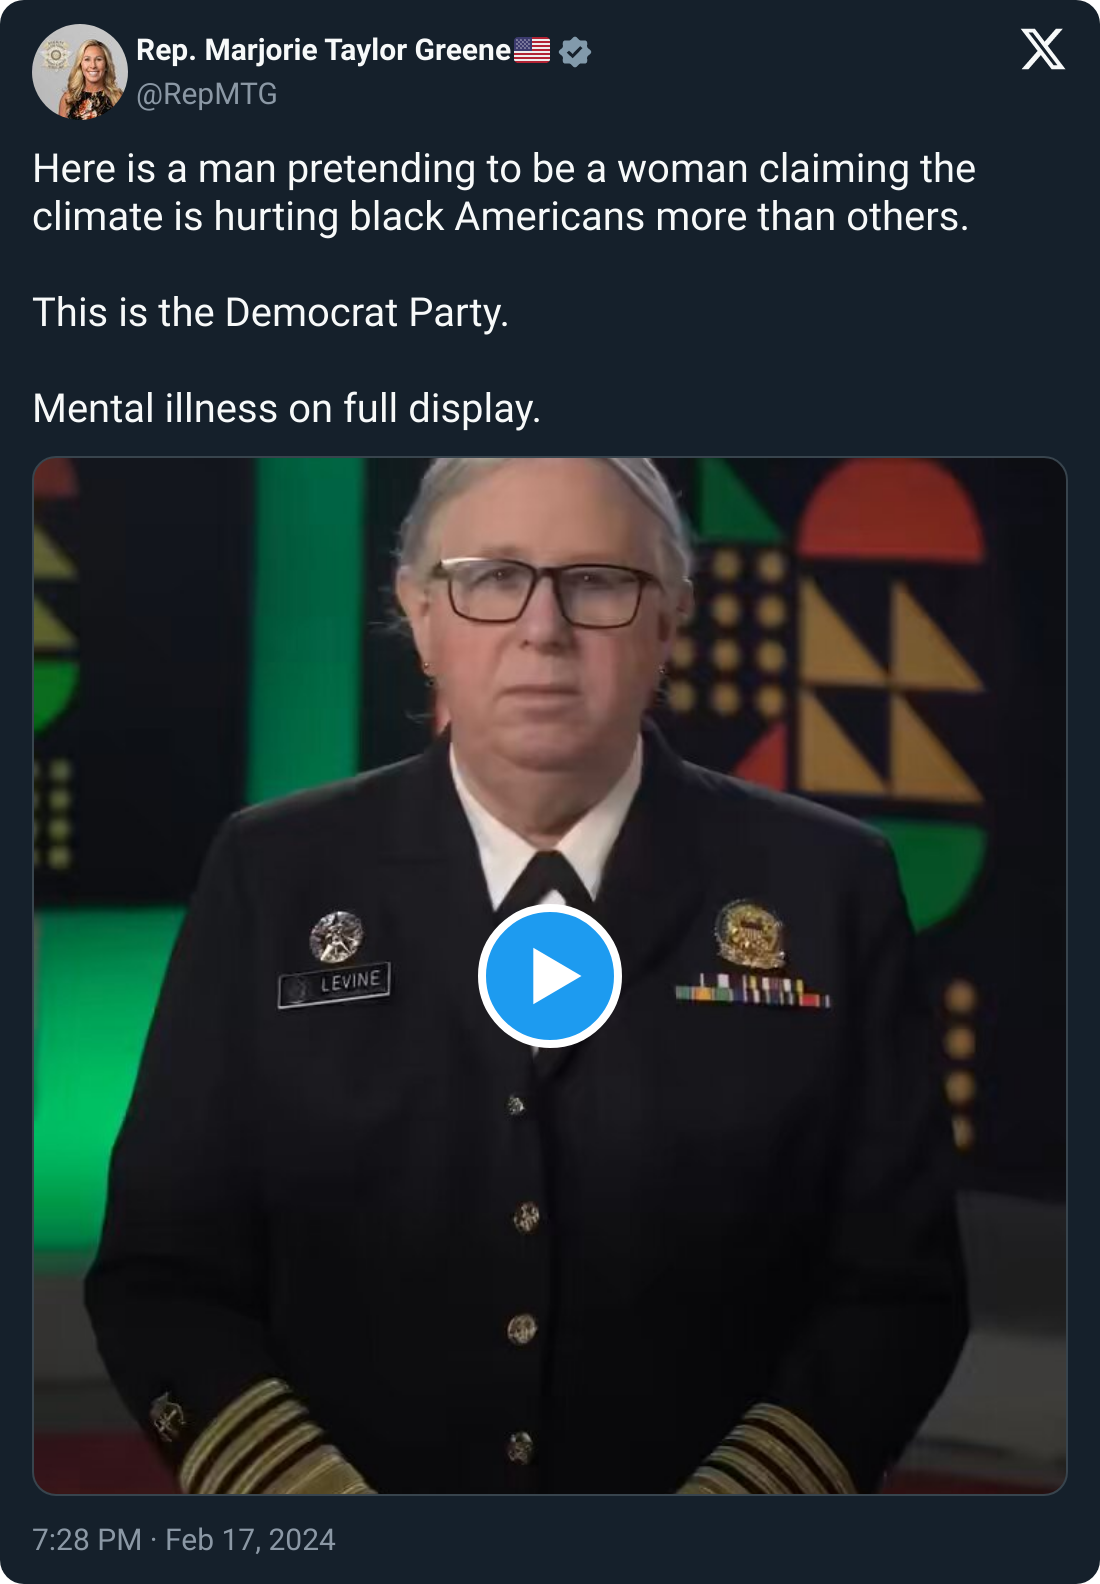 Marjorie Taylor Greene responds to a video featuring transgender U.S. admiral Rachel Levine with the following message: "Here is a man pretending to be a woman claiming the climate is hurting black Americans more than others. This is the Democrat Party. Mental illness on full display," 